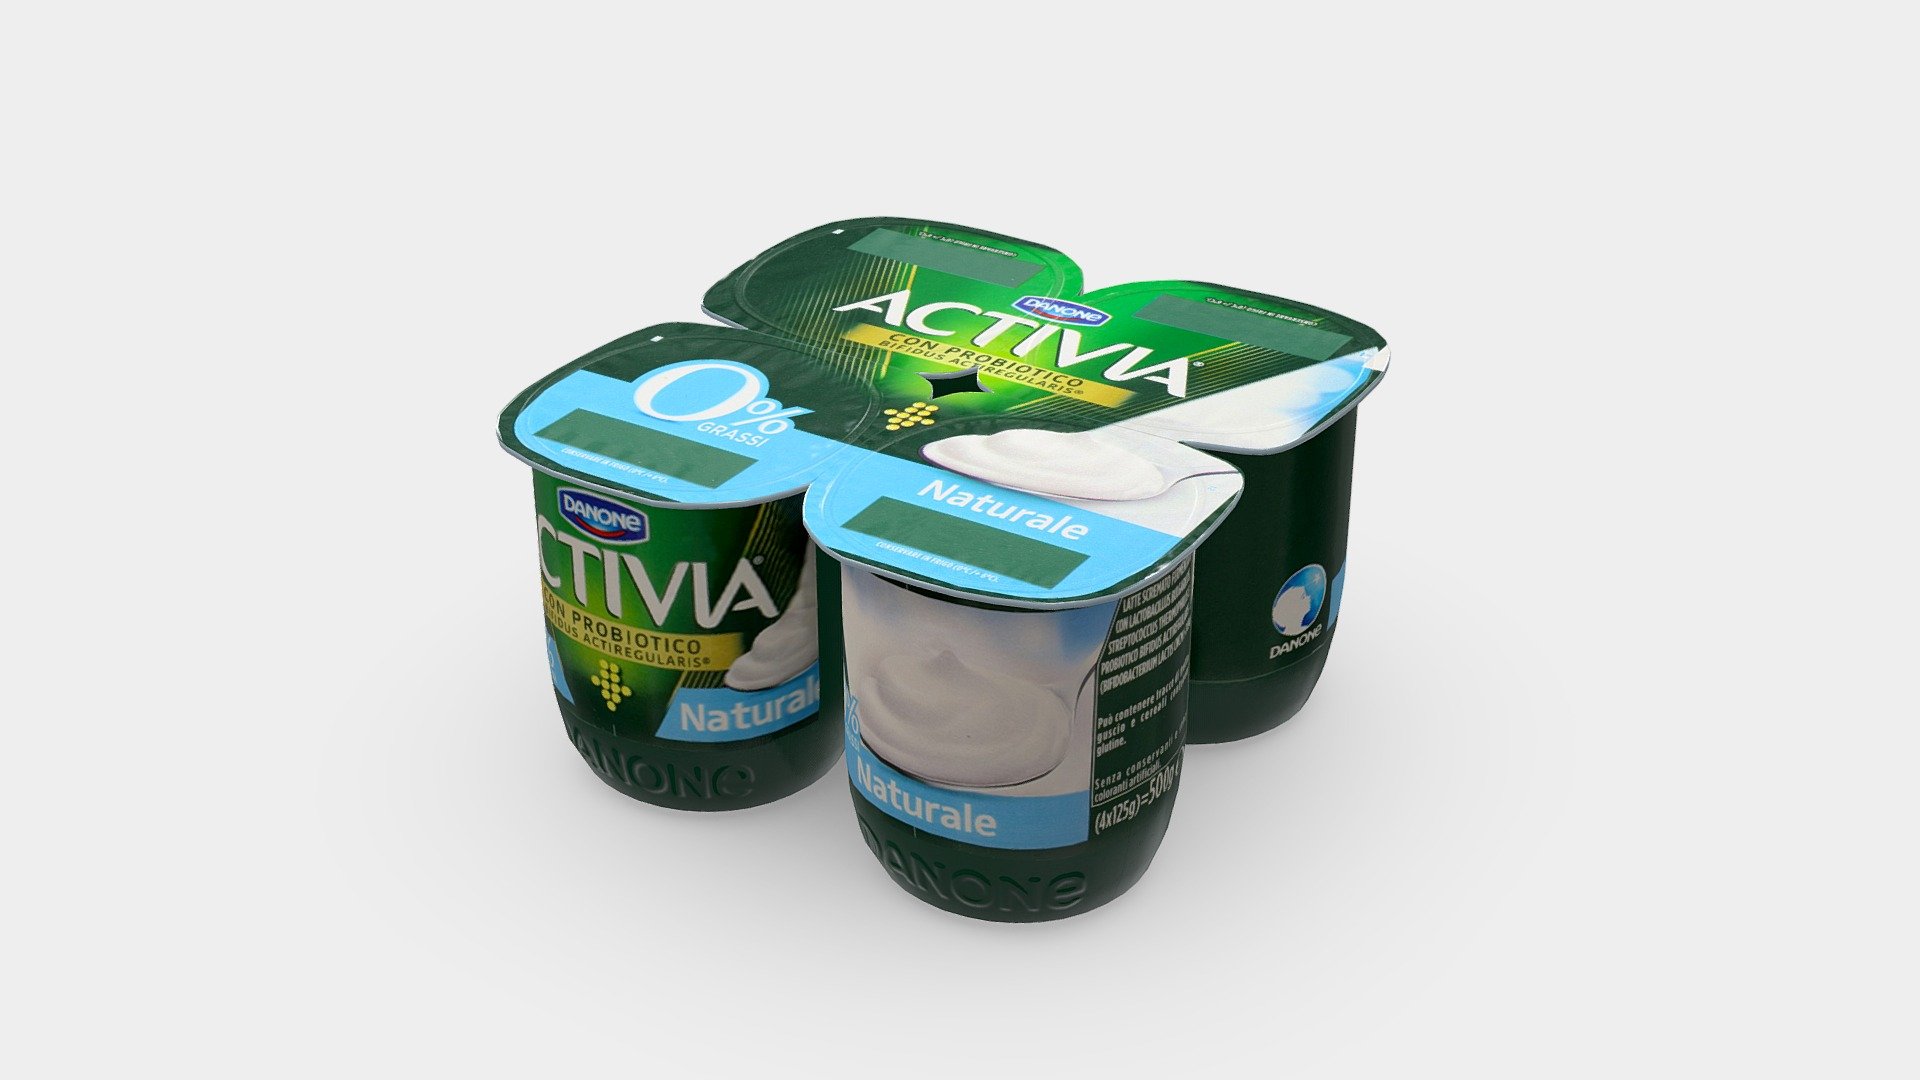 Activia yogurt Naturale 4 X 125 G
VR and game ready for high quality Architectural Visualization
EAN: 8001630005559 - ACTIVIA - Yogurt naturale - 3D model by Invrsion 3d model